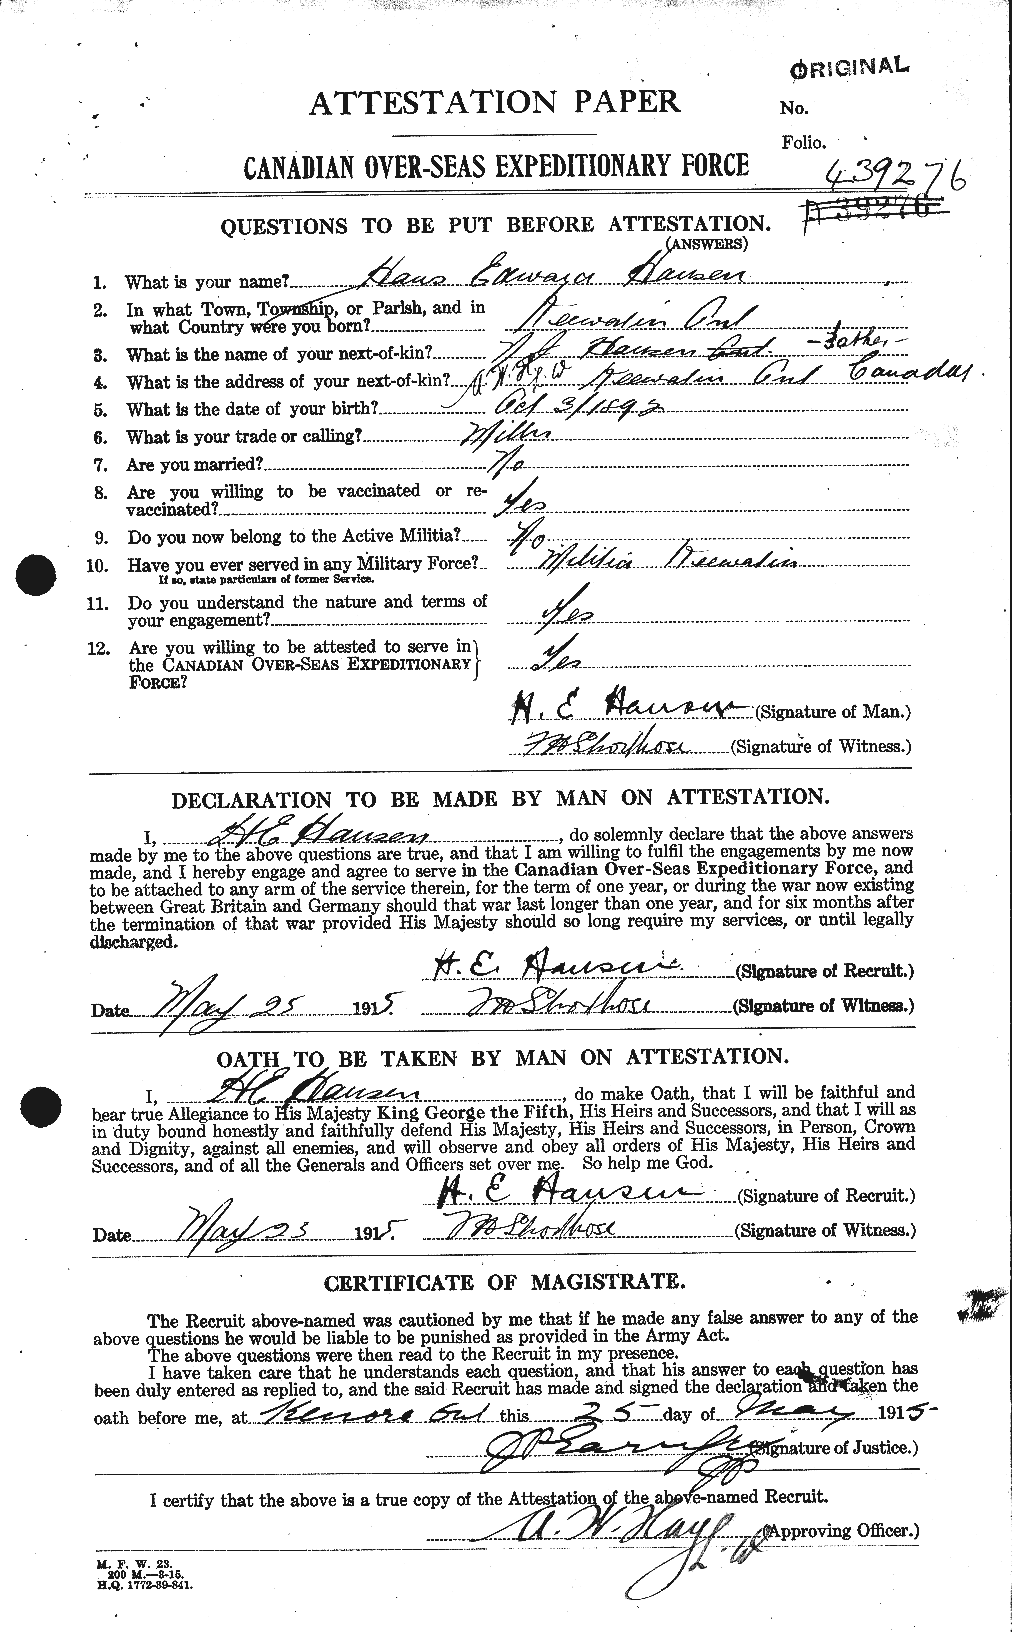 Personnel Records of the First World War - CEF 378671a